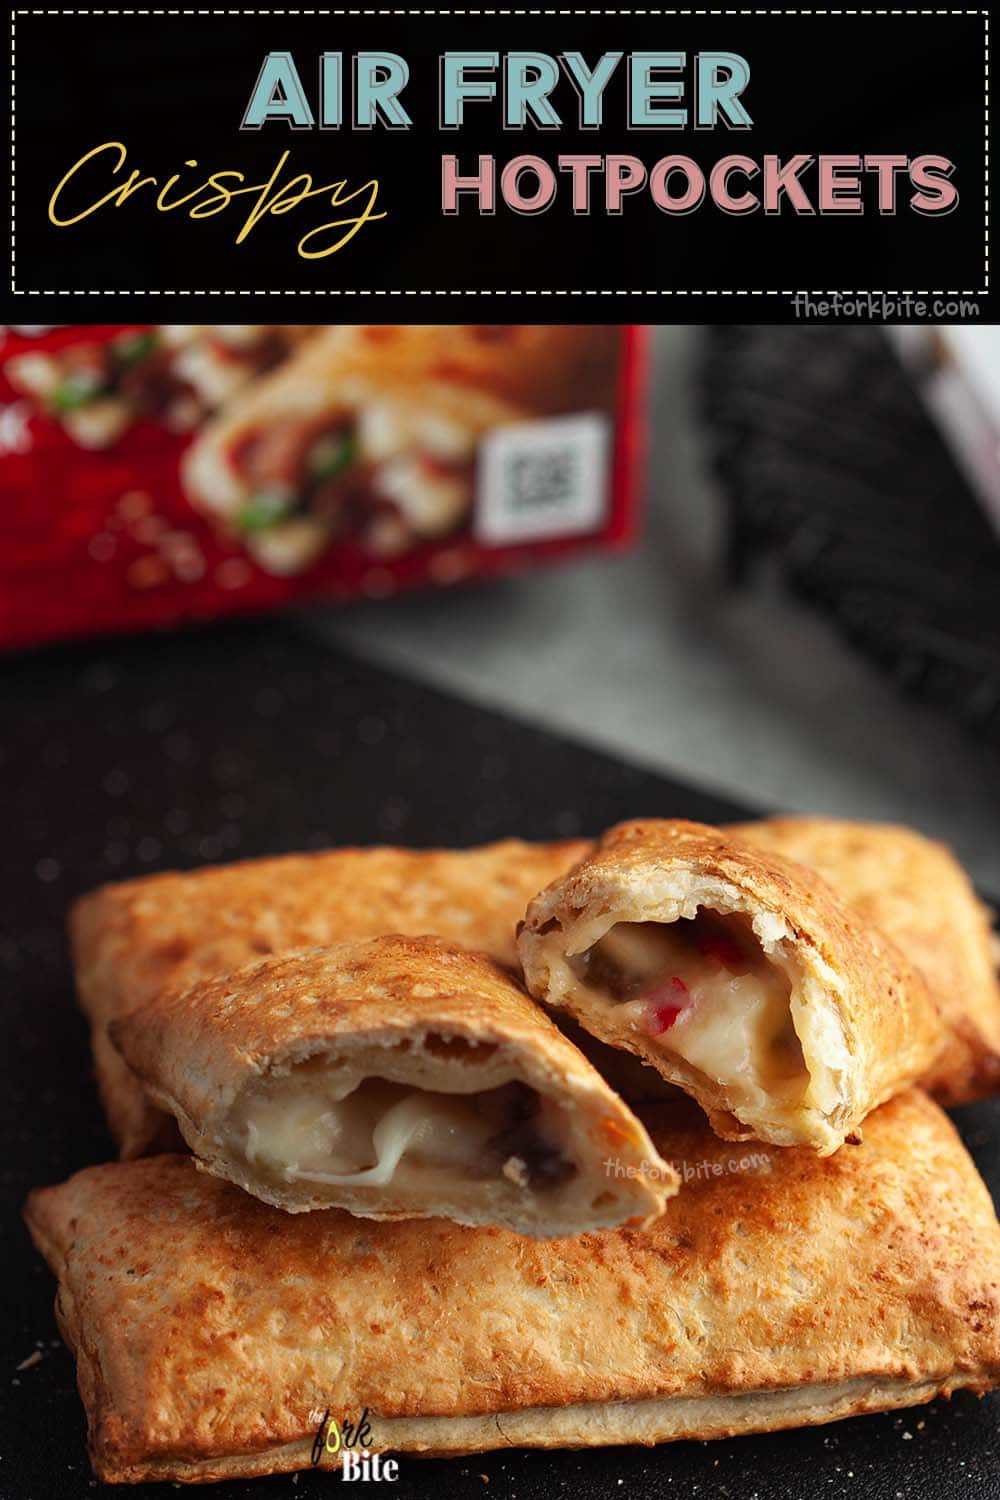 What's the secret for the crispy hot pocket finish? it's the hot pockets in air fryer cooked from frozen to piping hot until the surface shell turns crunchy.